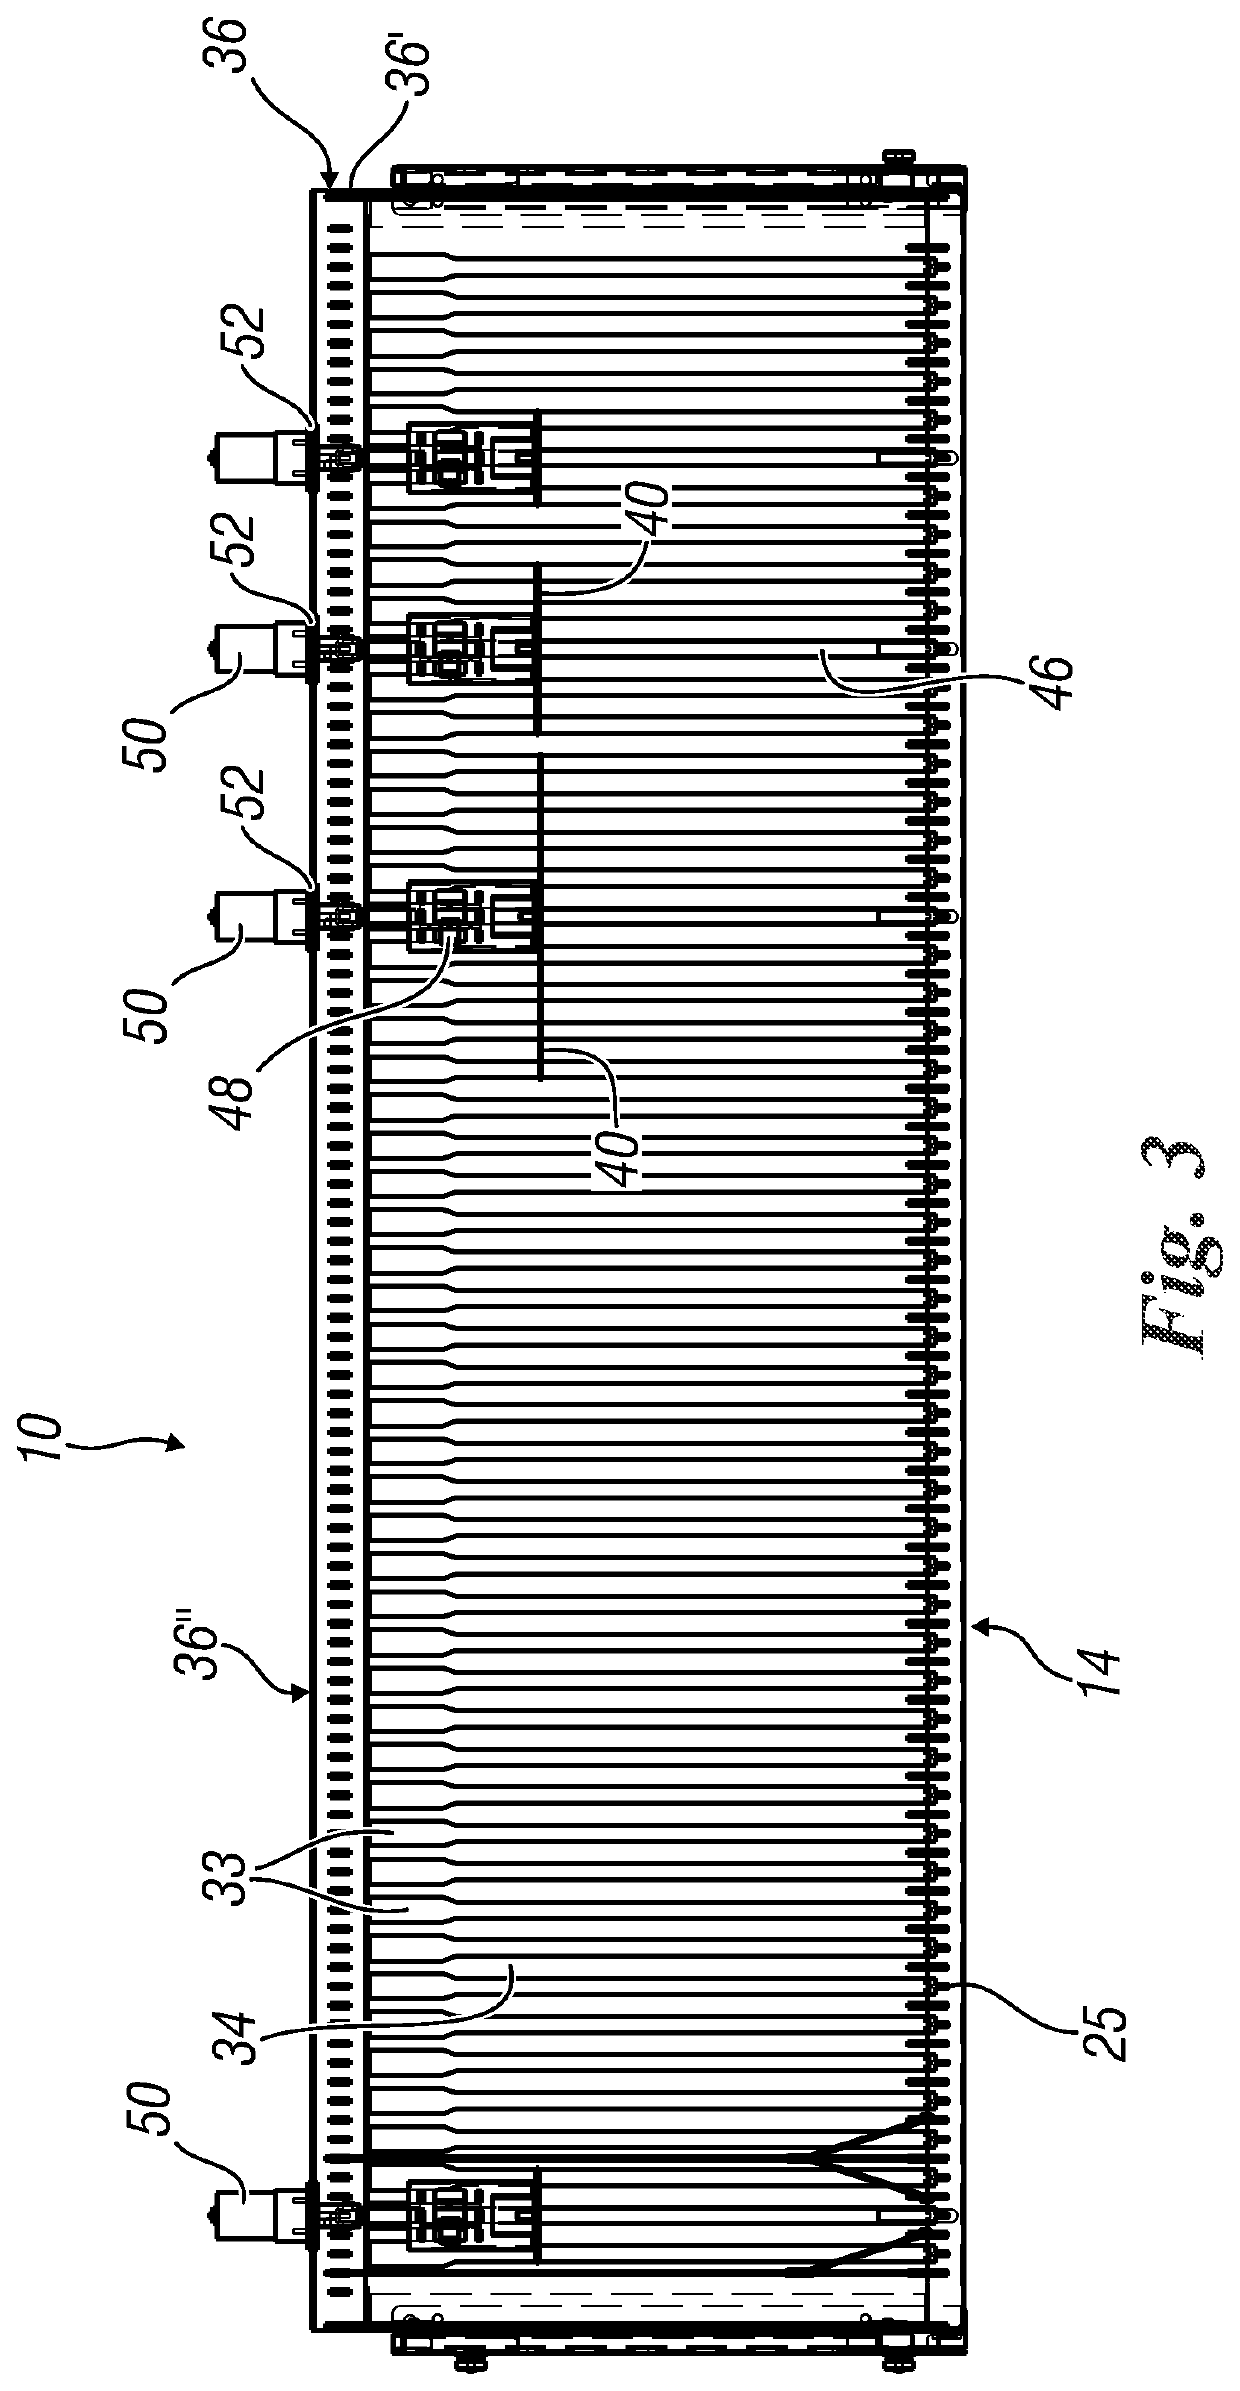 Enhanced ejection device for an automatic vending machine